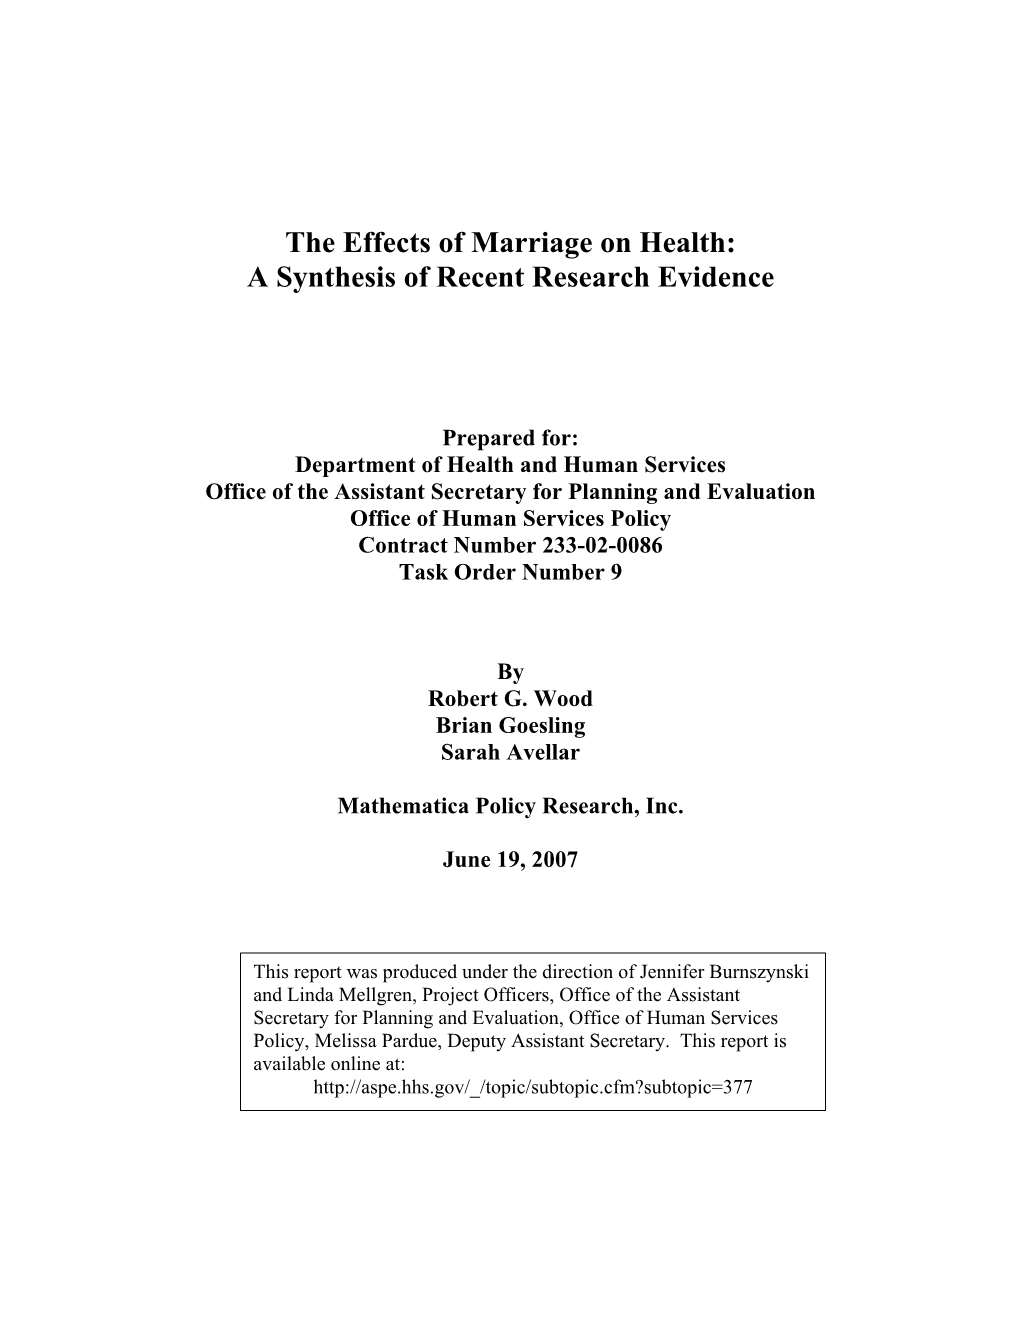 The Effects of Marriage on Health: a Synthesis of Recent Research Evidence